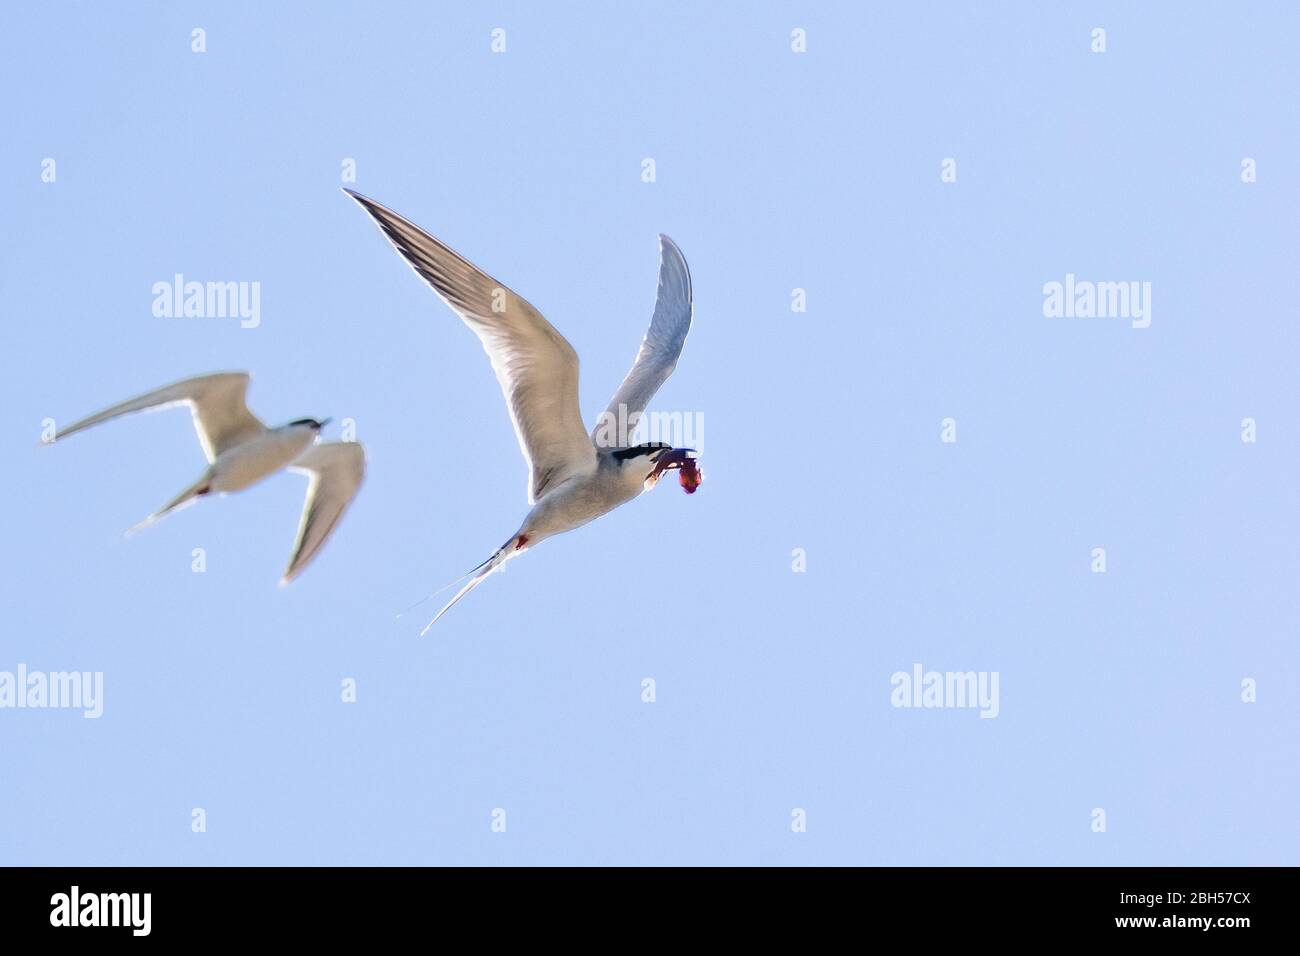 Flying Caspian Tern (Hydroprogne caspia) with a freshly caught fish in its beak, followed closely by a second one, blue sky background; San Francisco Stock Photo